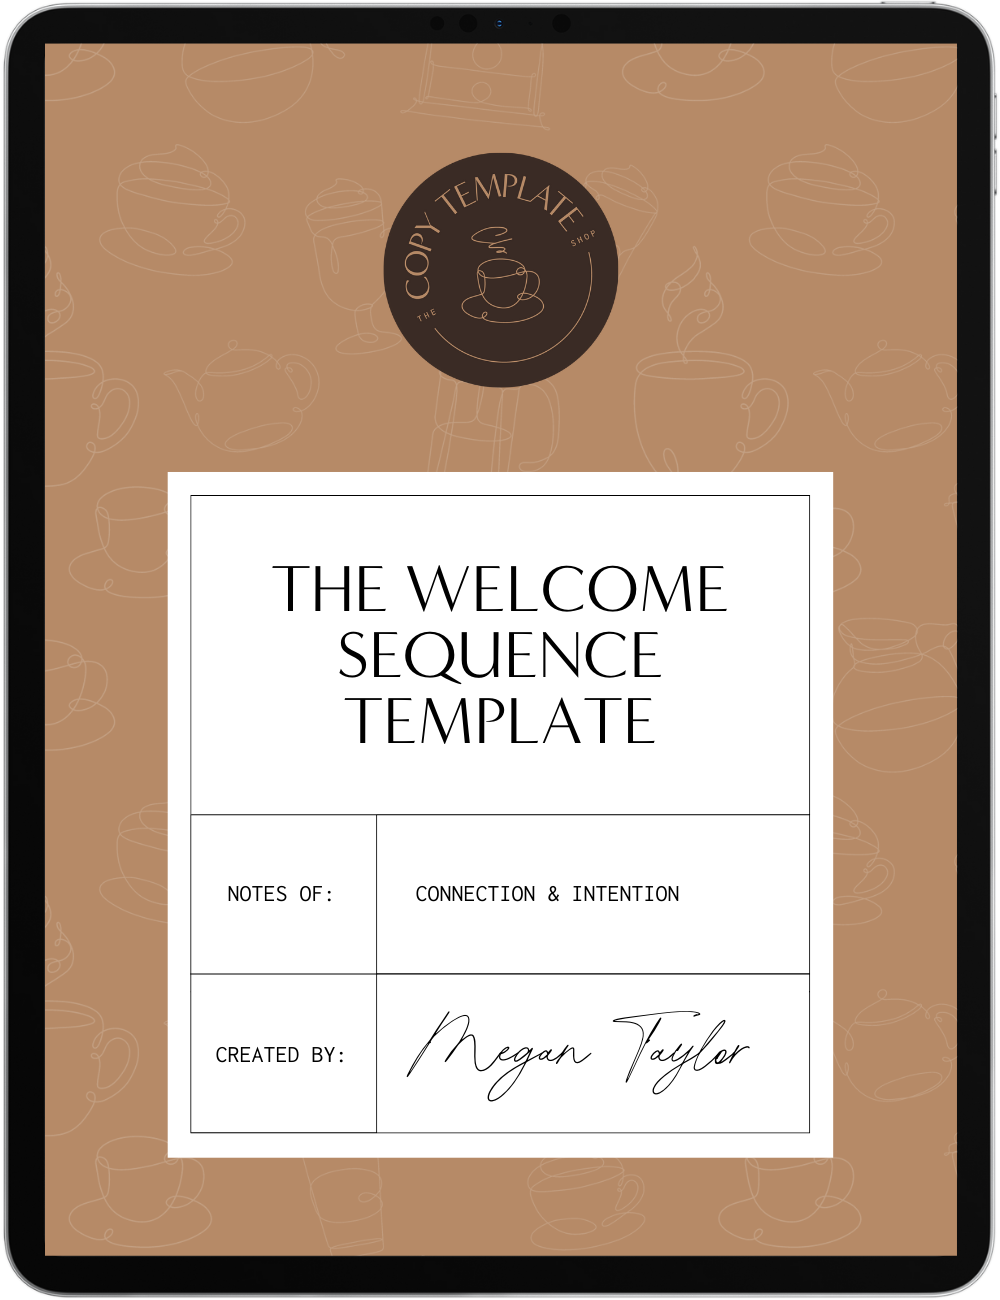 Welcome sequence email templates shown on a tablet